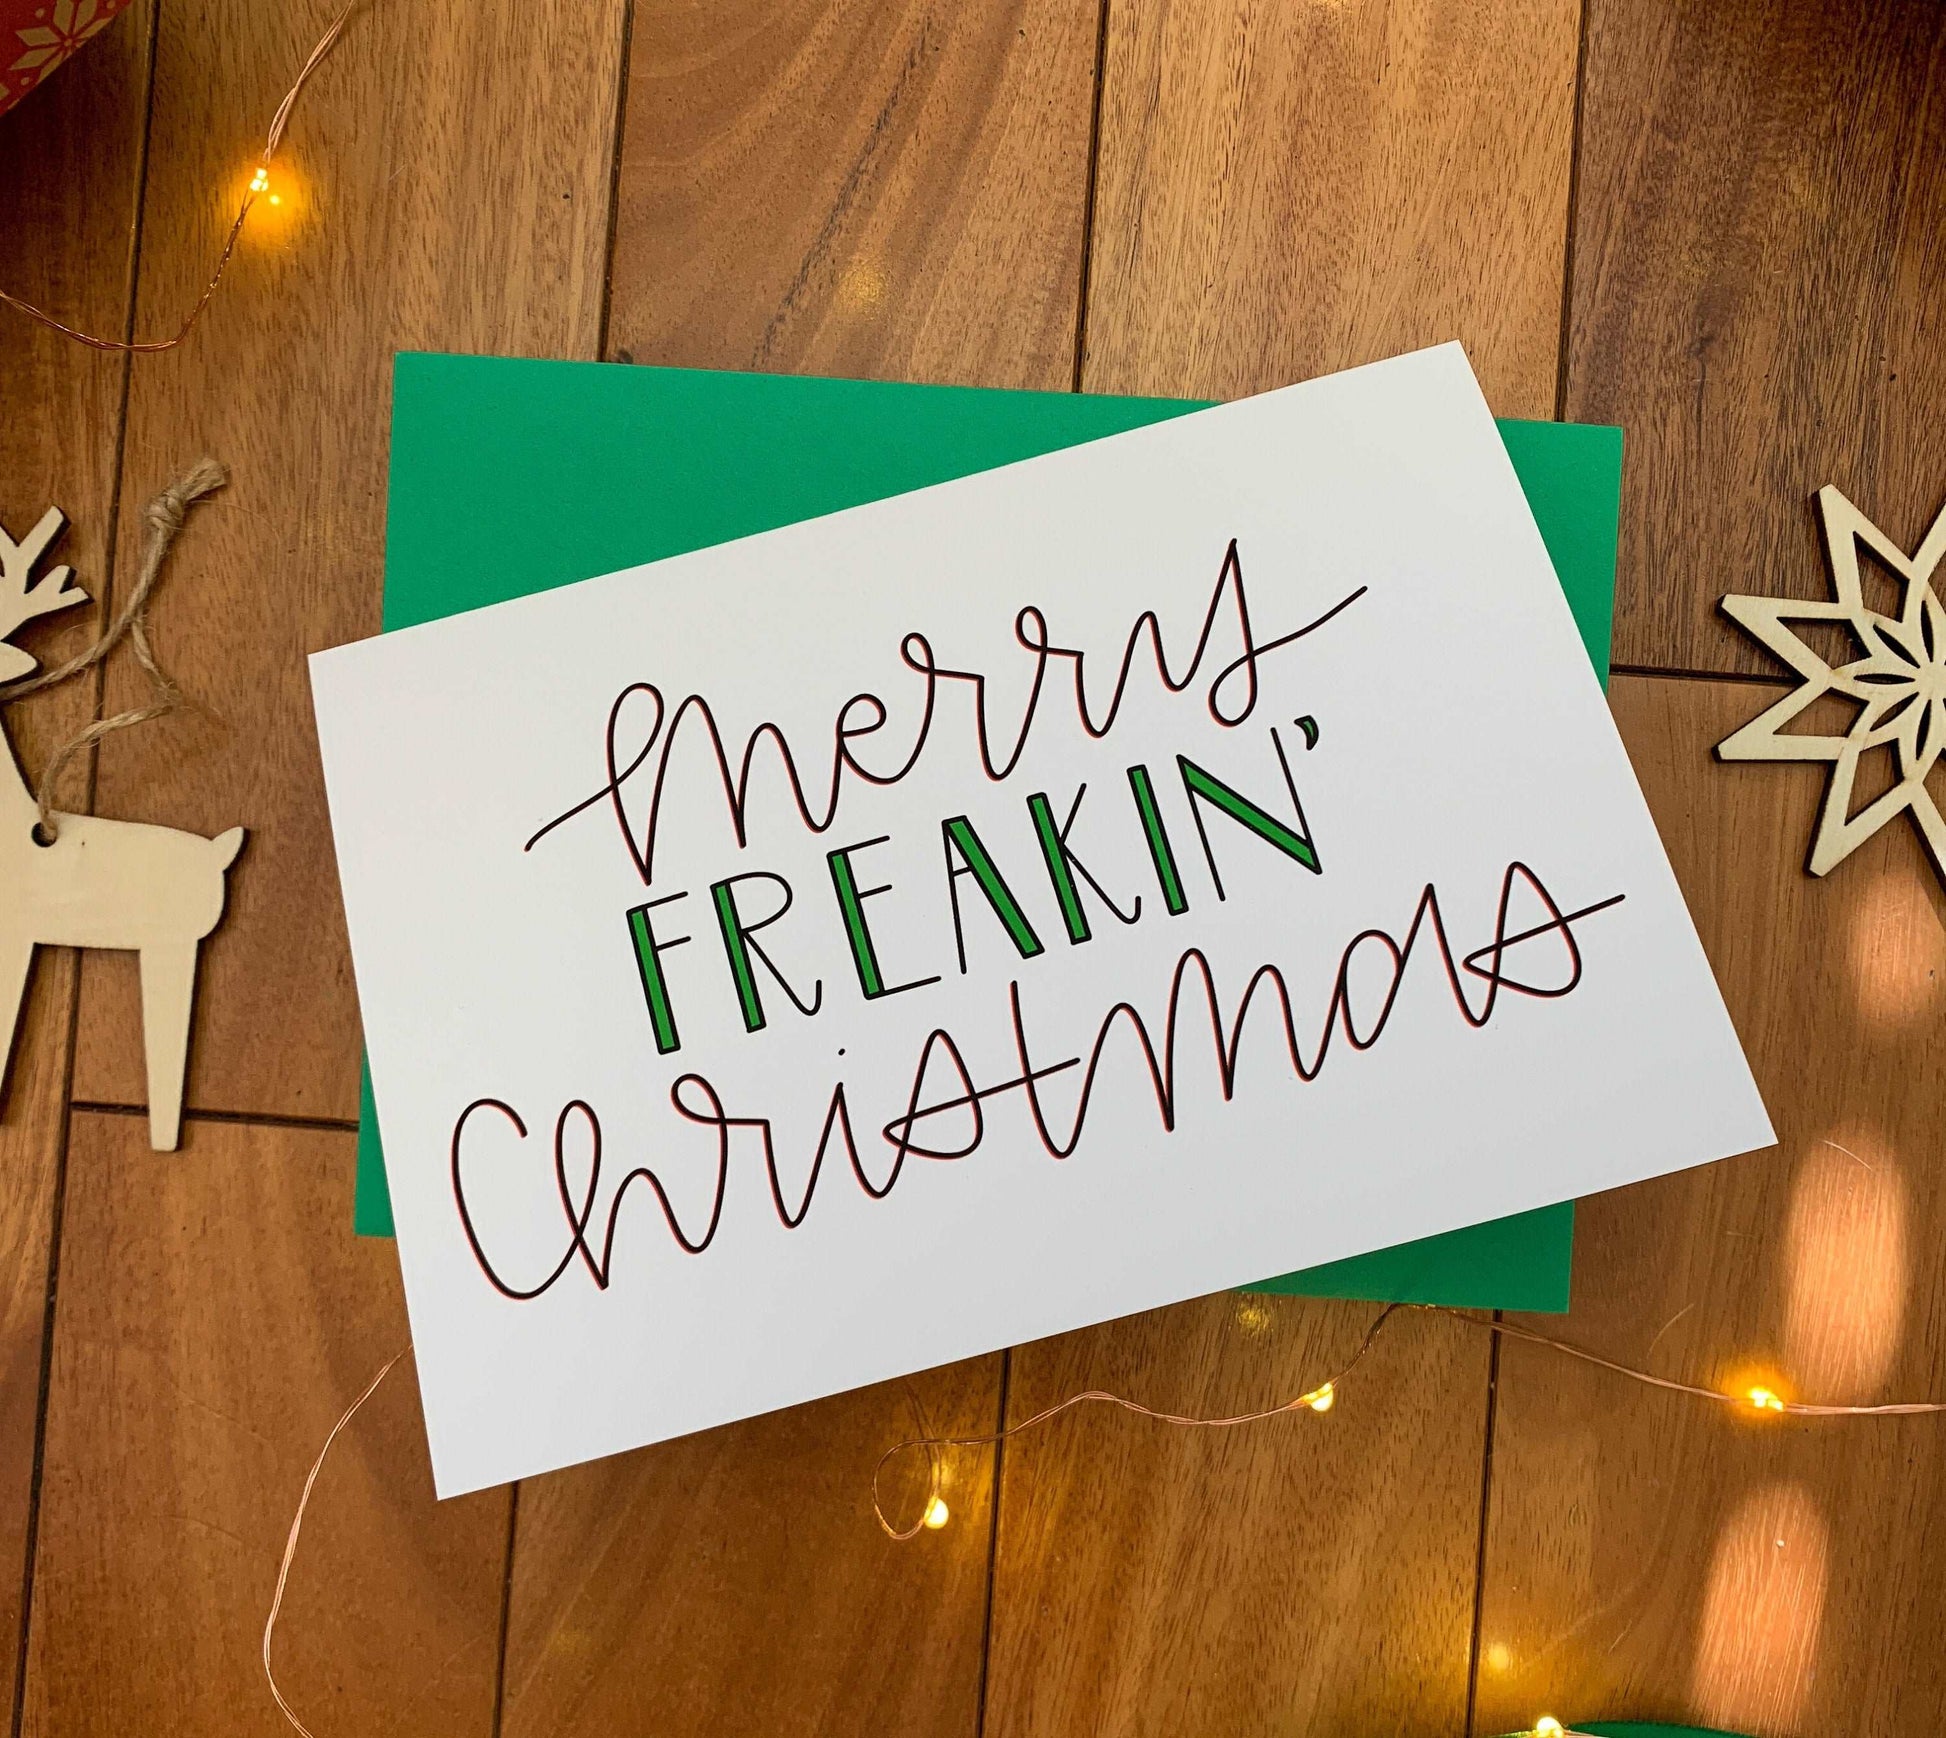 Fun Handmade Holiday Merry Freaking Christmas Holiday Card by StoneDonut Design